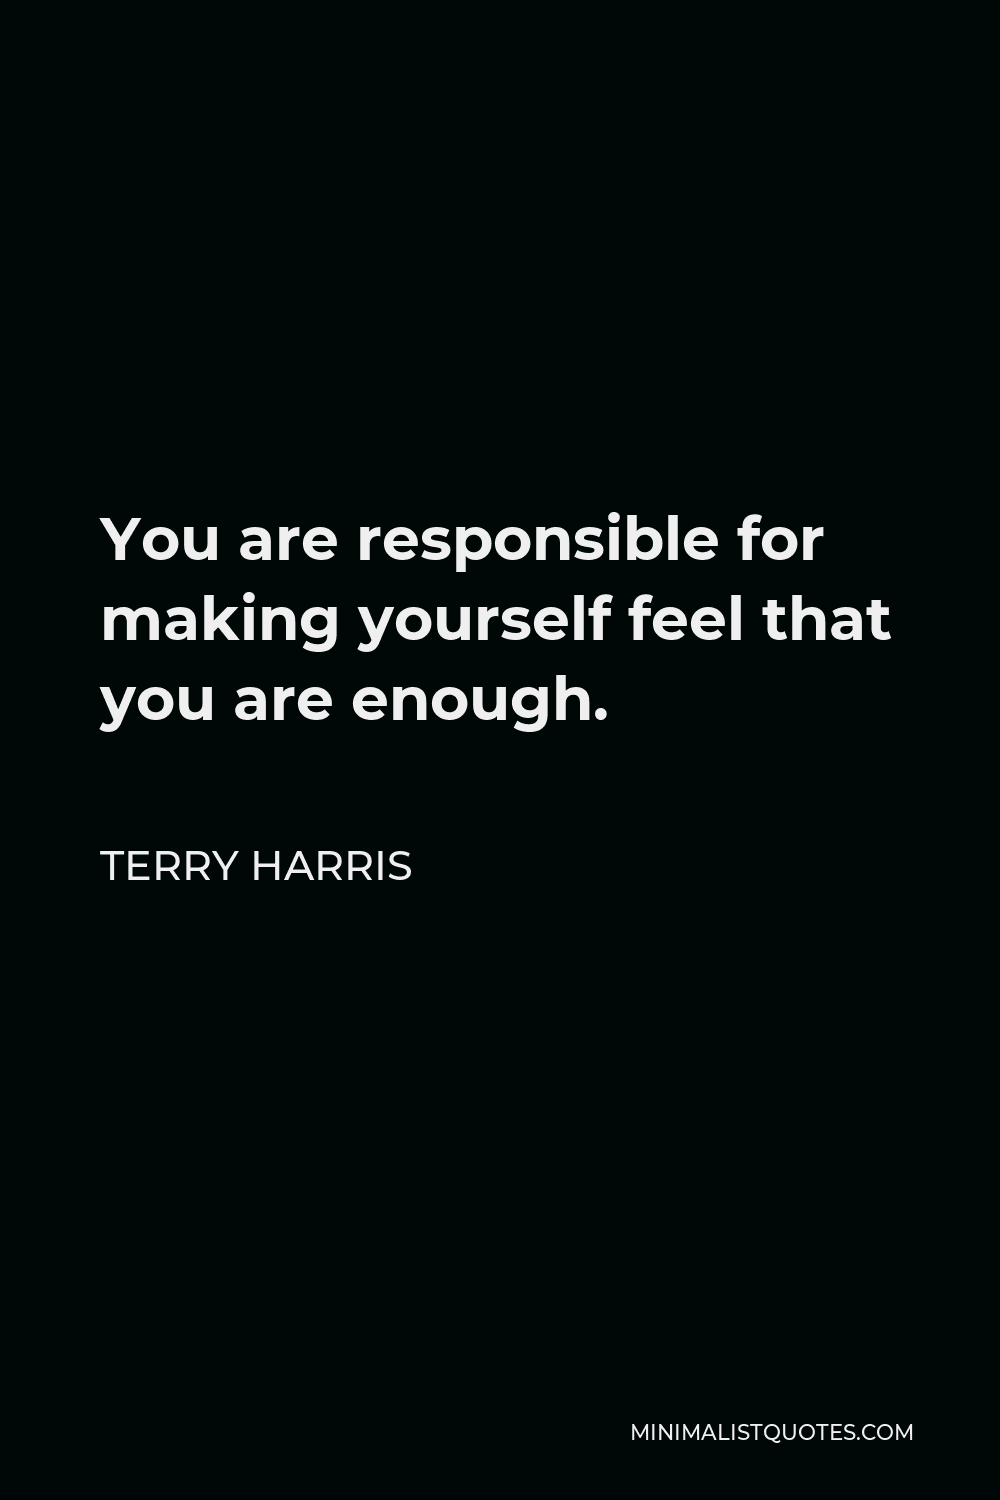 Terry Harris Quote - You are responsible for making yourself feel that you are enough.